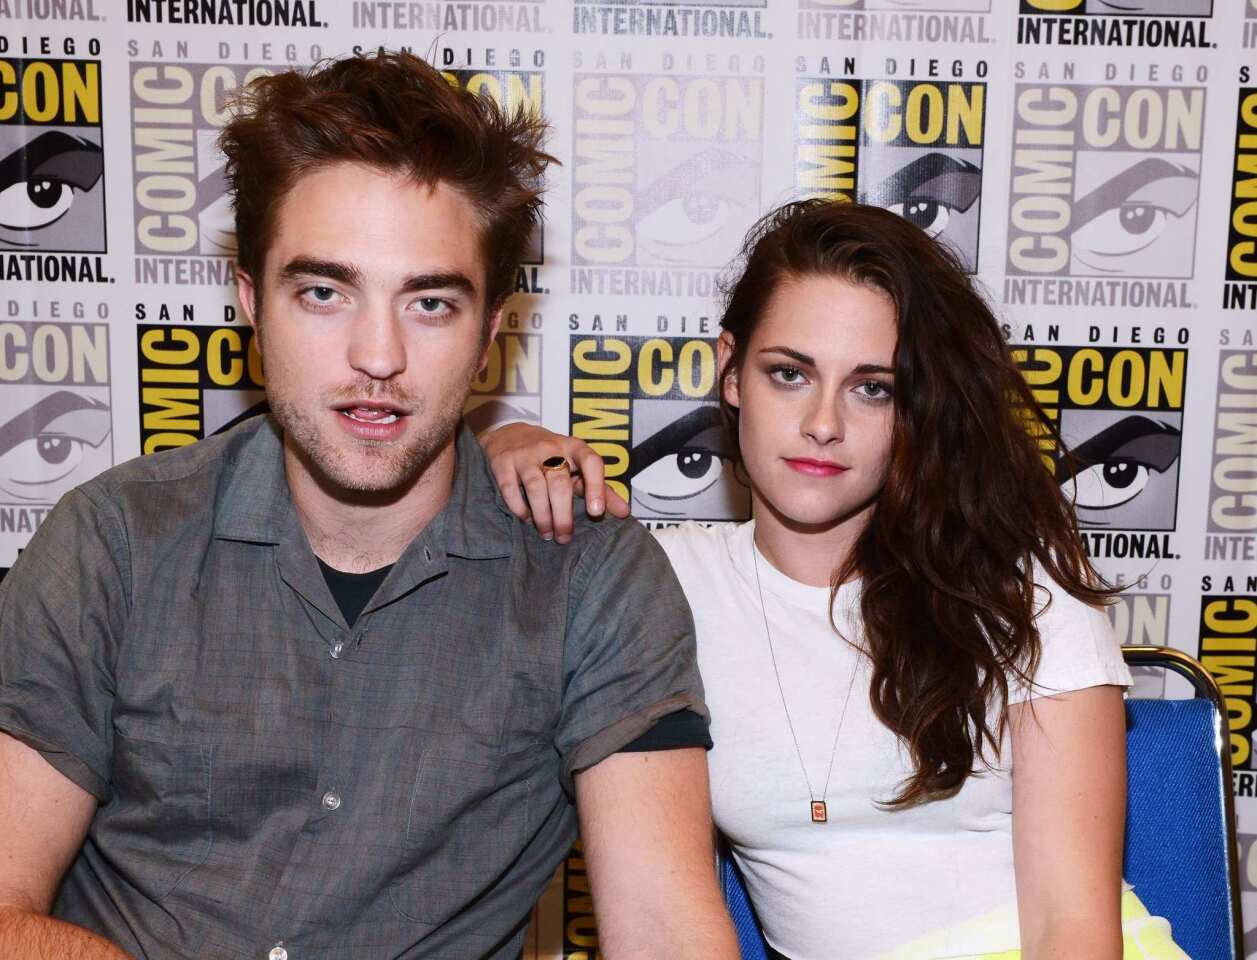 Rob and Kristen head to Comic-Con for the last fan panel of the film series. Call this relaxed photo the calm before the storm -- less than two weeks later, an Us magazine cover would reveal the potential end of Robsten, with claims of Kristen Stewart cheating on her costar and longtime beau with director Rupert Sanders.